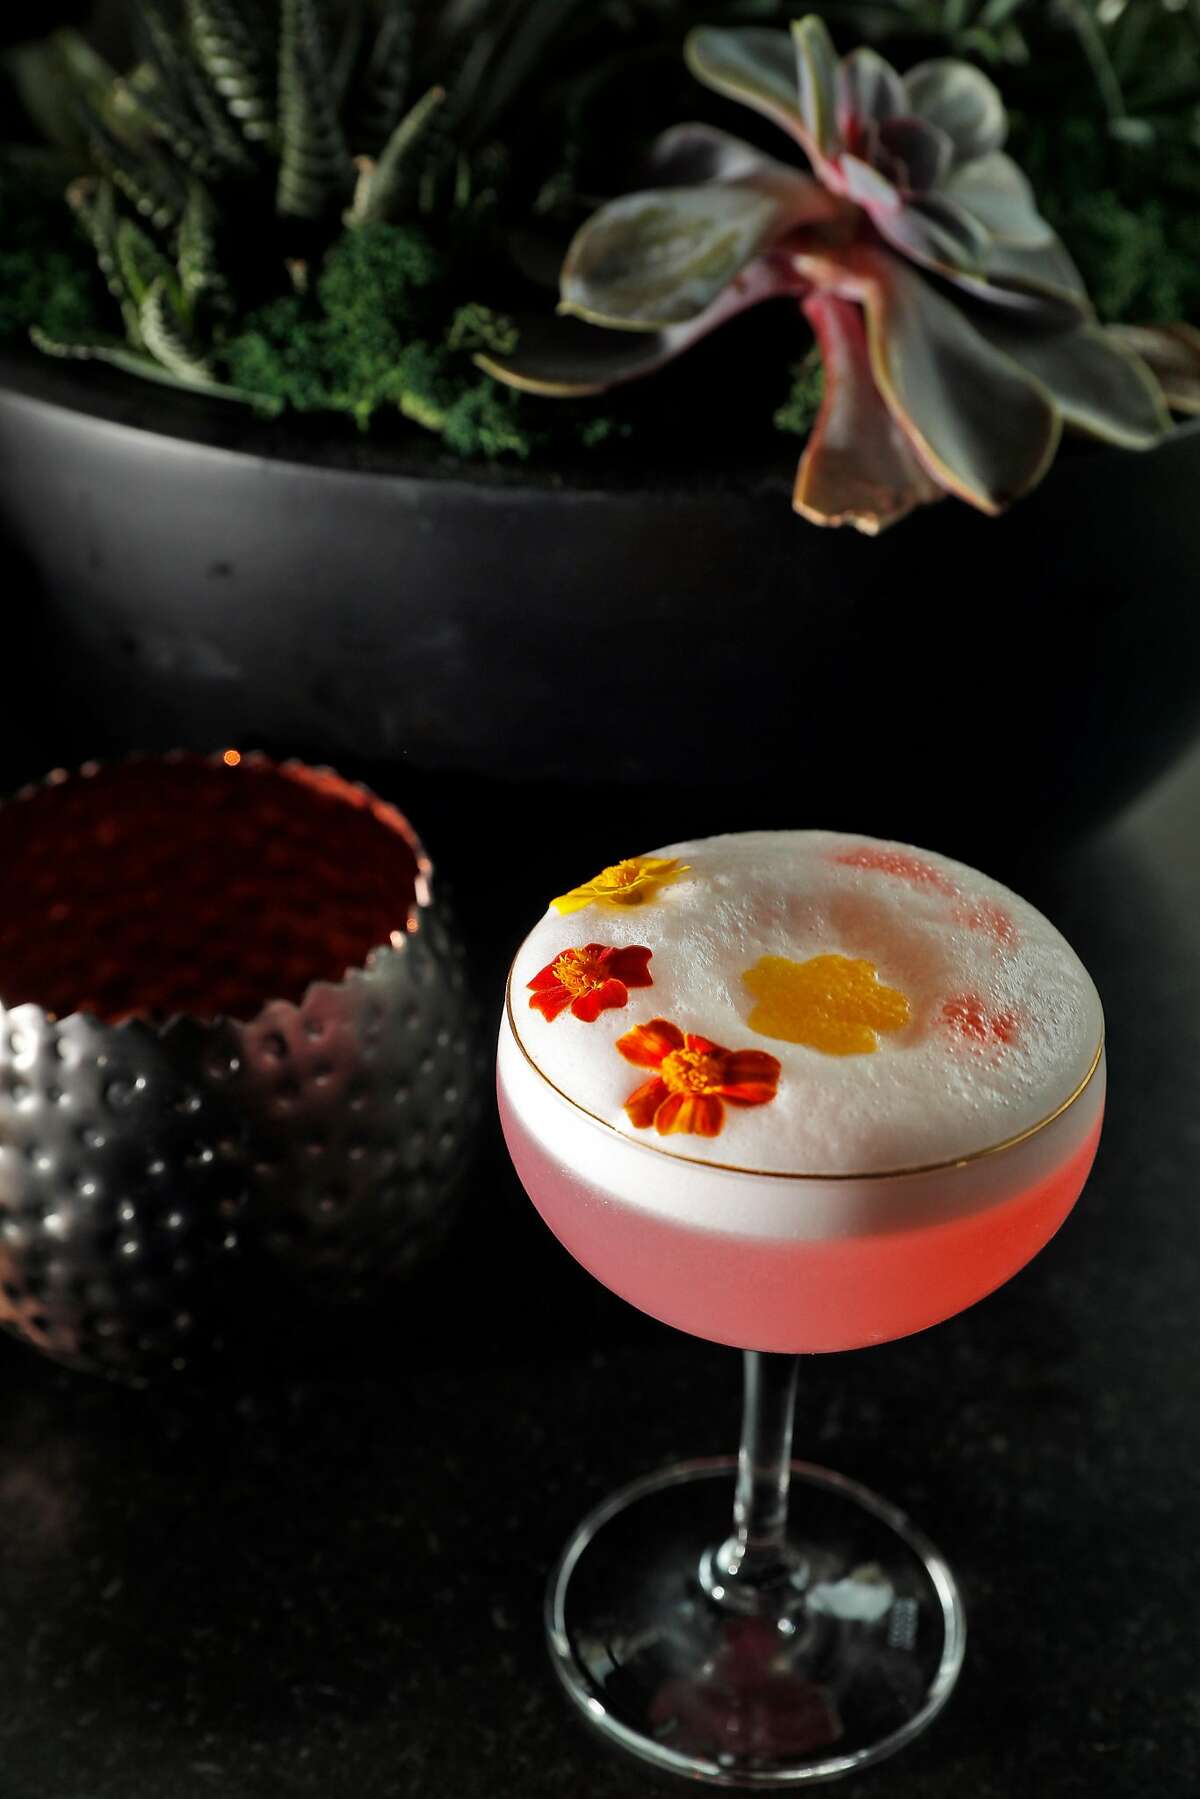 The Sakura cocktail served at the Kabuki Hotel bar in San Francisco, Calif., on Thursday, March 15, 2018. The hotel lobby and bar were recently renovated with more seating areas added.